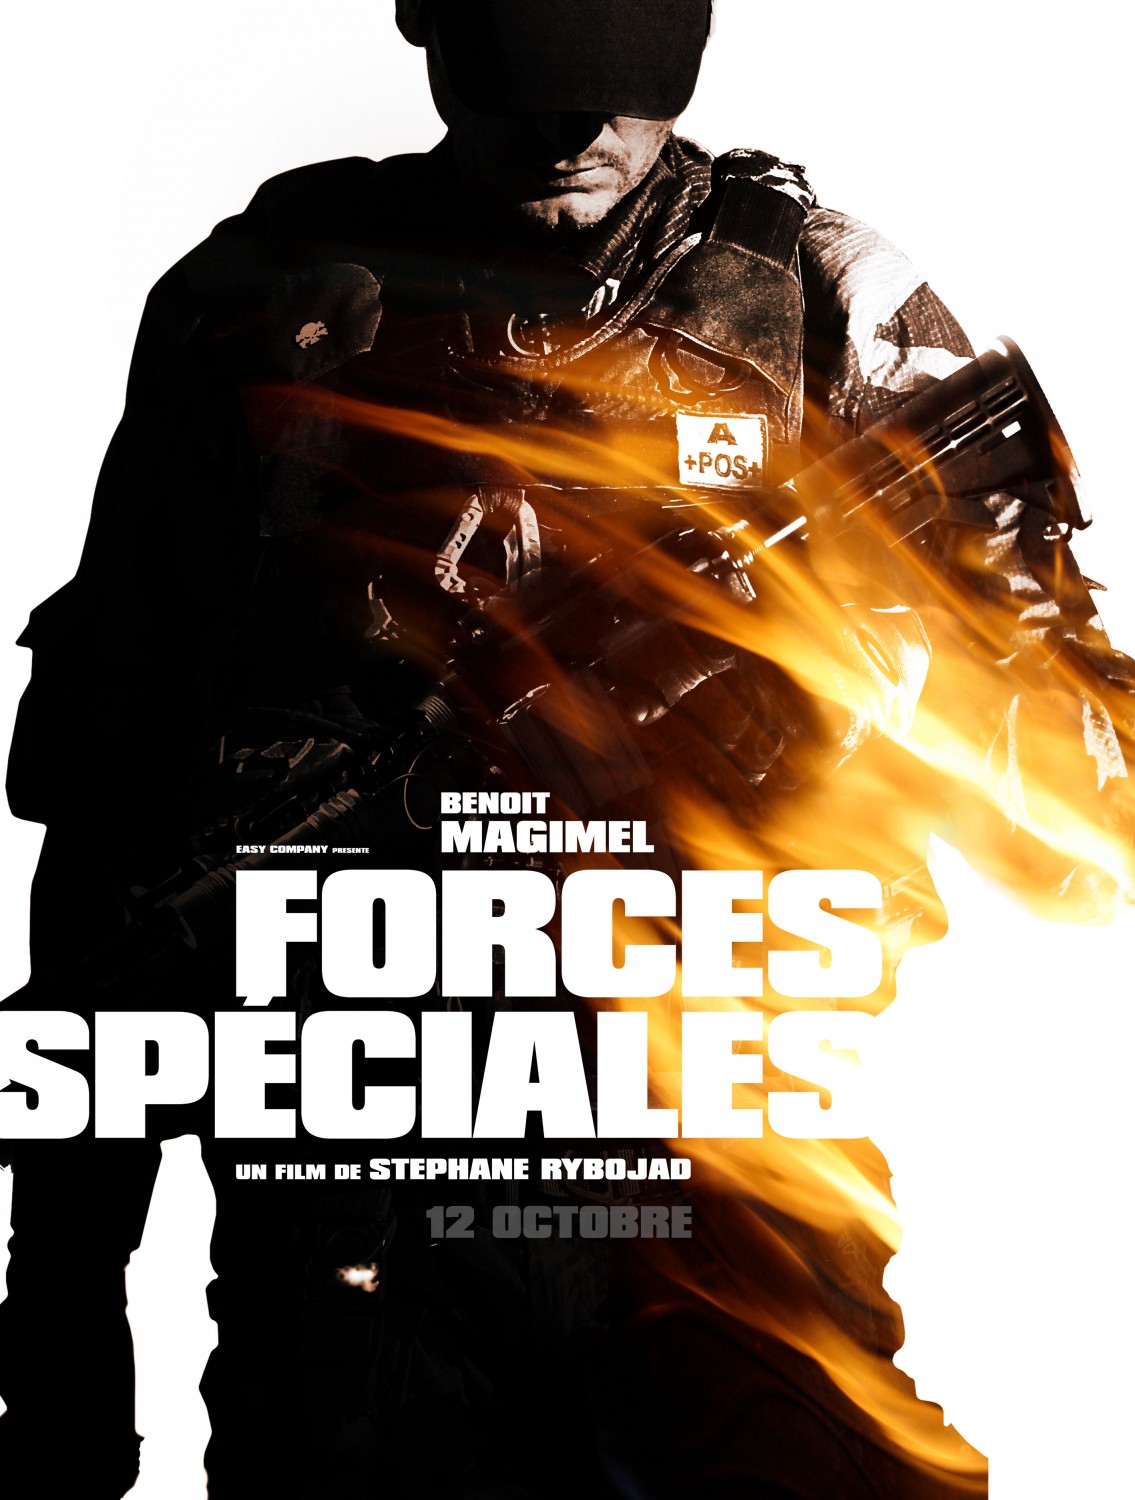 Extra Large Movie Poster Image for Forces spéciales (#2 of 6)